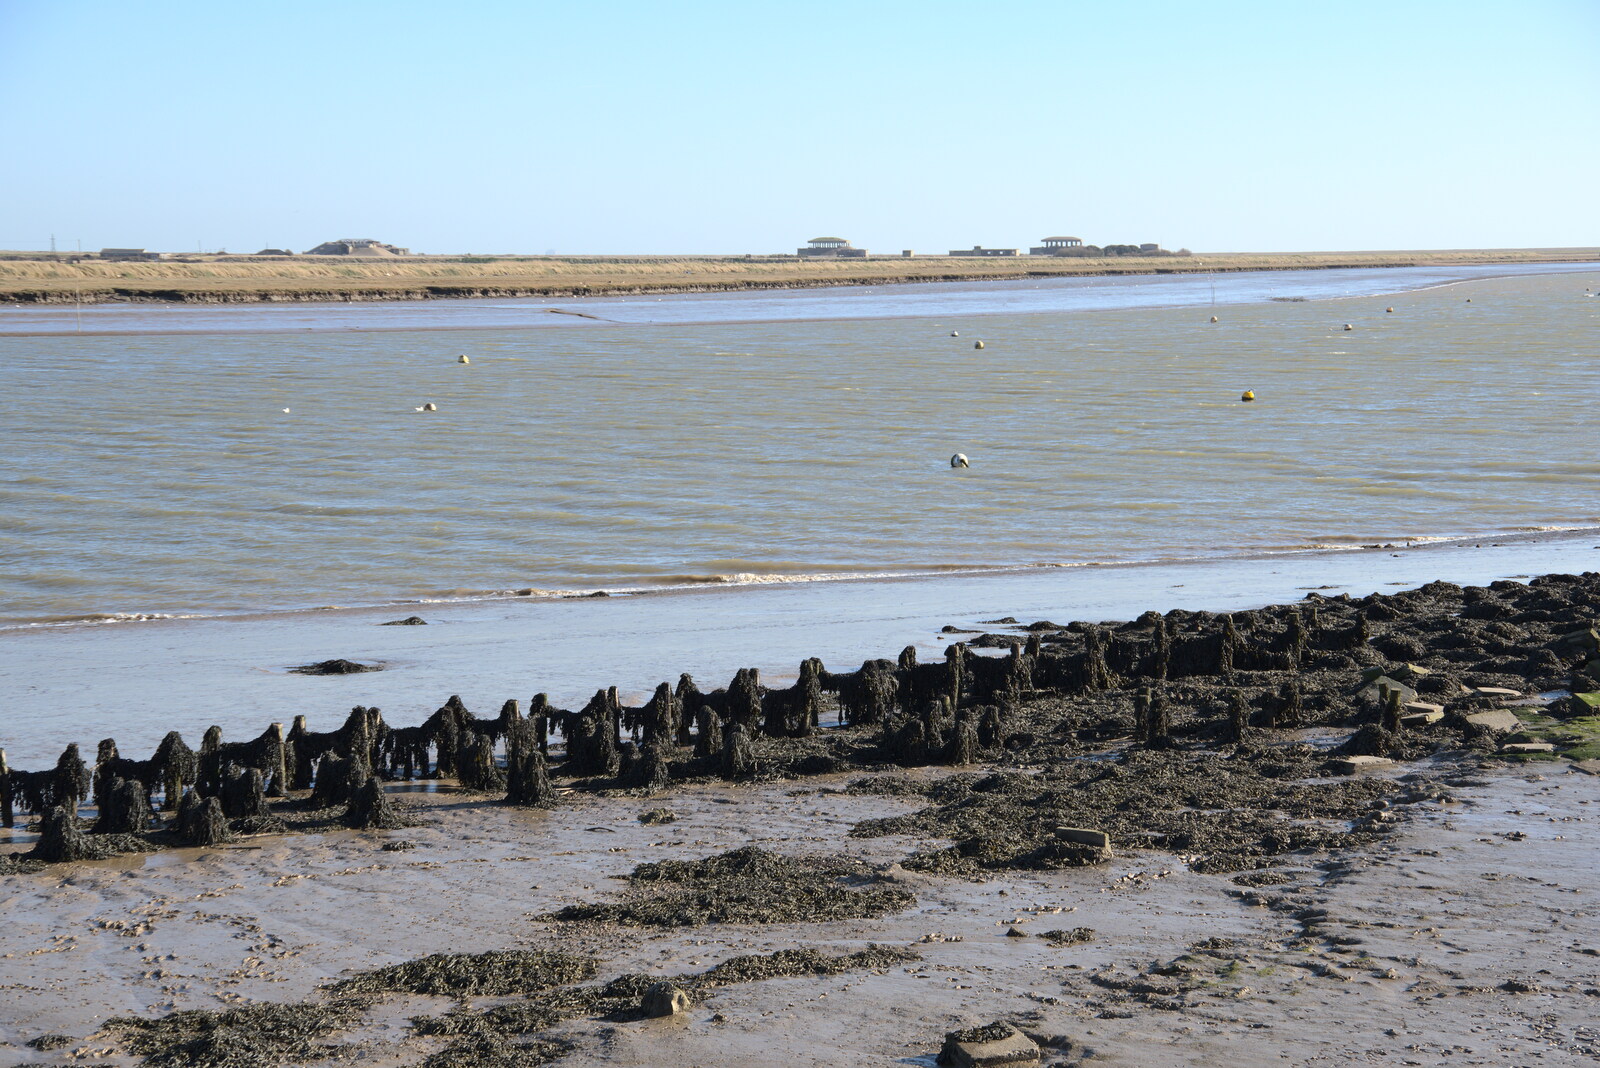 The River Alde from A Trip to Orford Castle, Orford, Suffolk - 26th February 2022